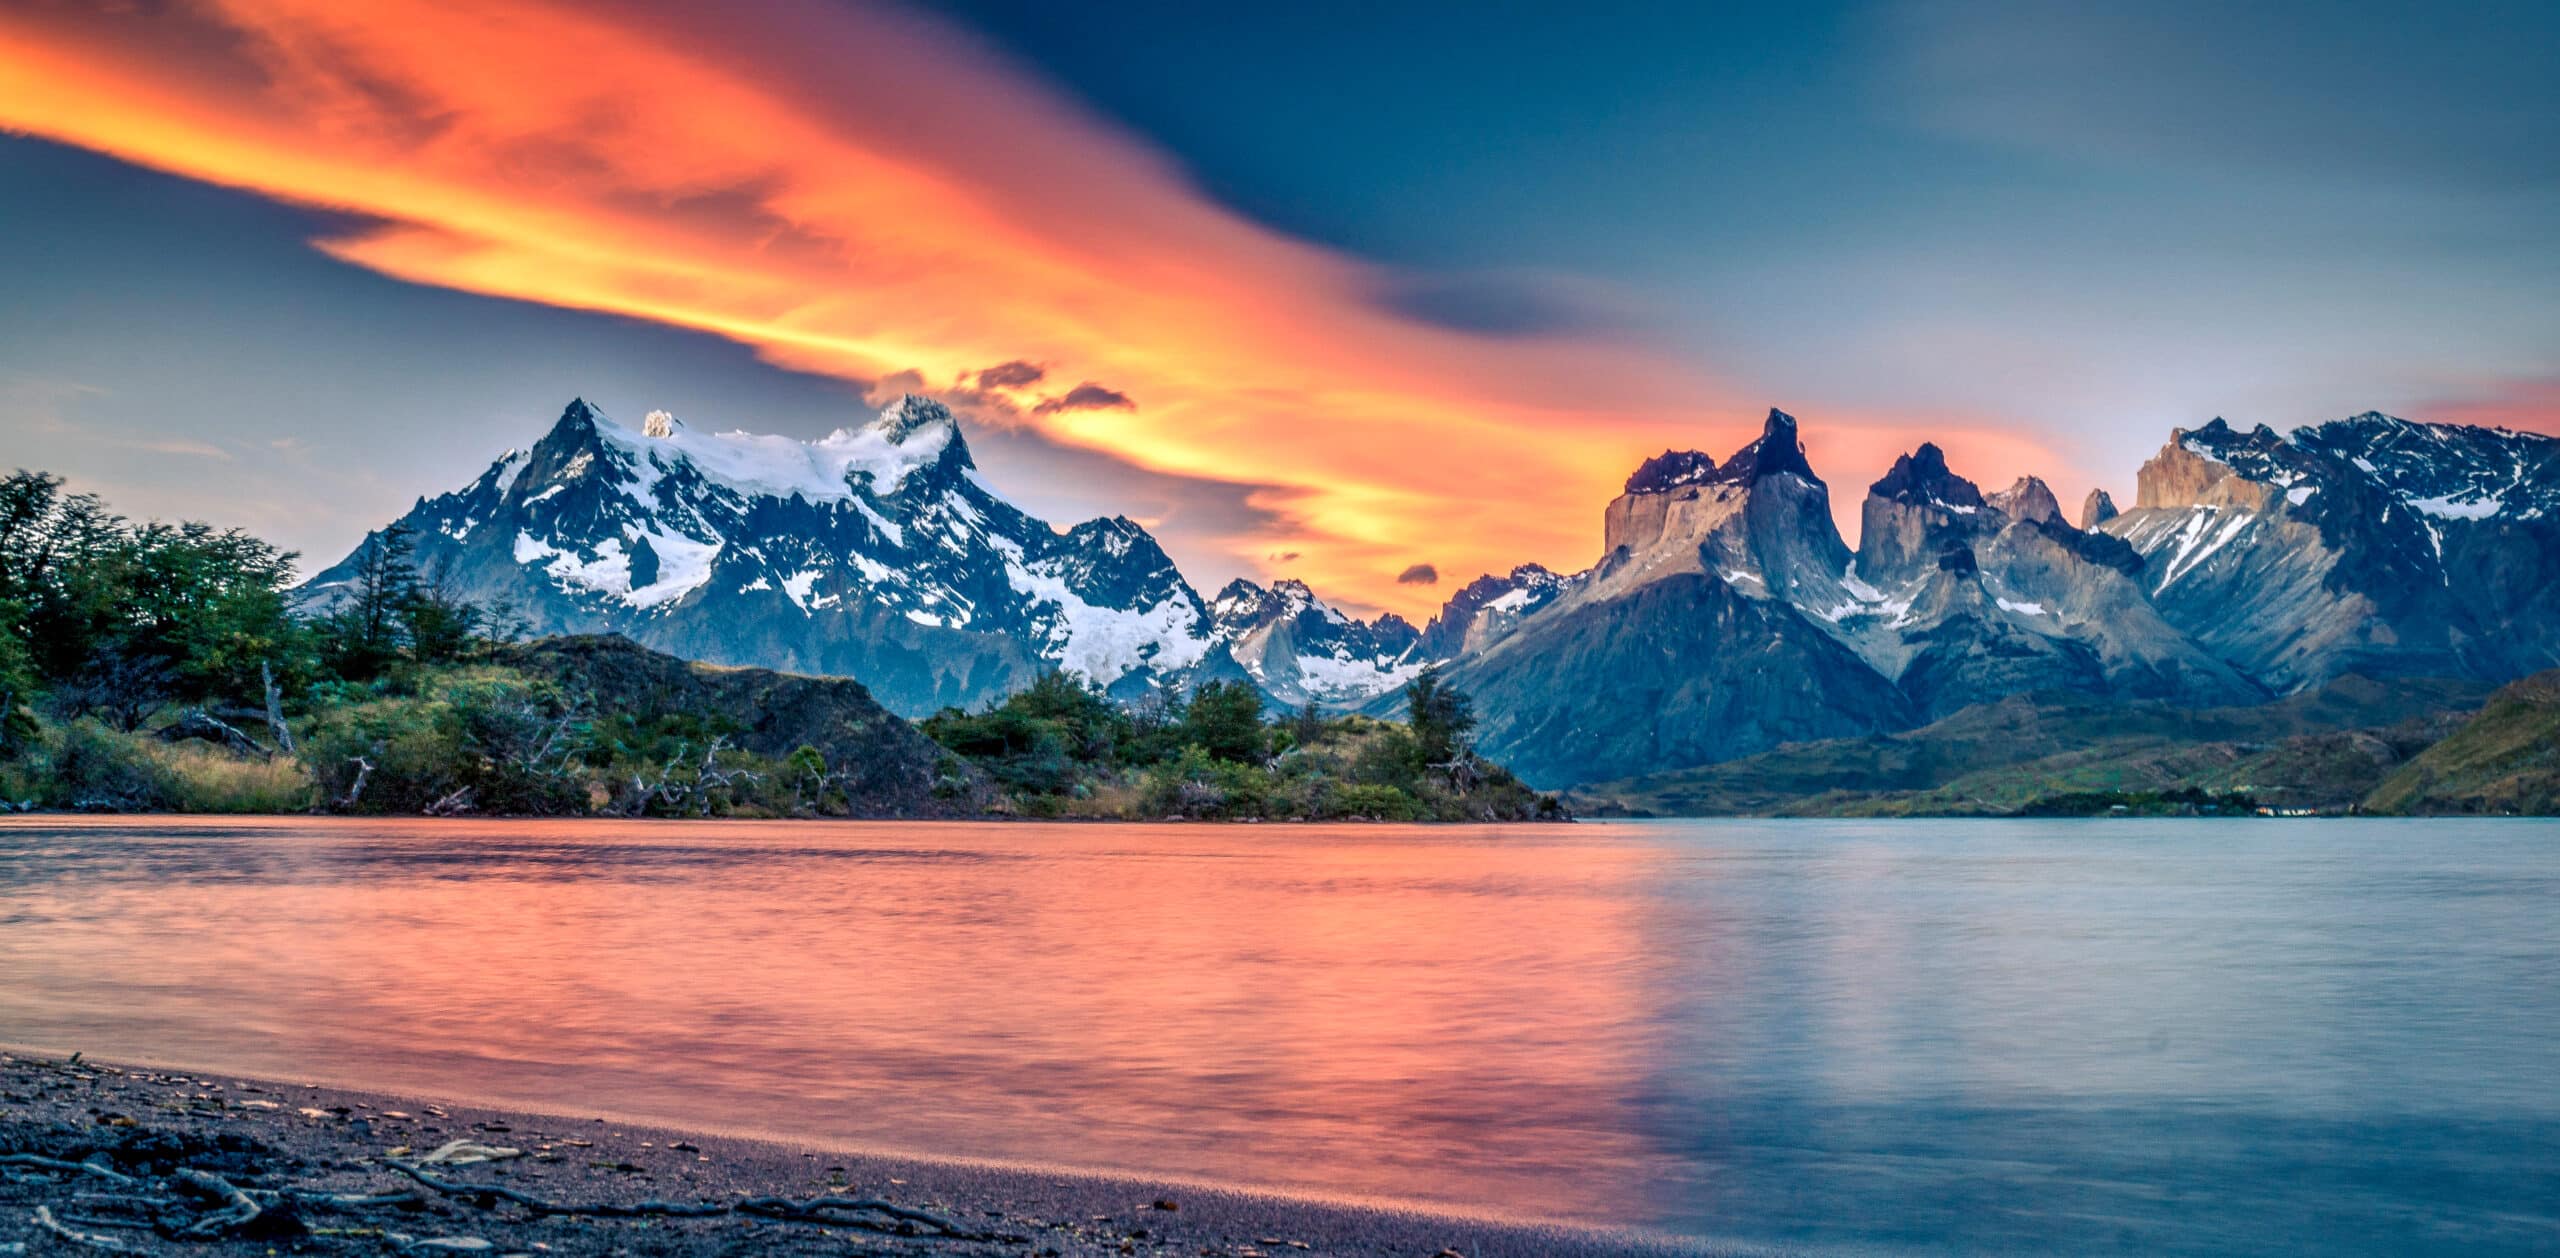 https://www.wildernesstravel.com/wp-content/uploads/2023/06/10-INPAT-sunset-lake-reflection-clouds-patagonia-torres-del-paine-national-park-scaled.jpg